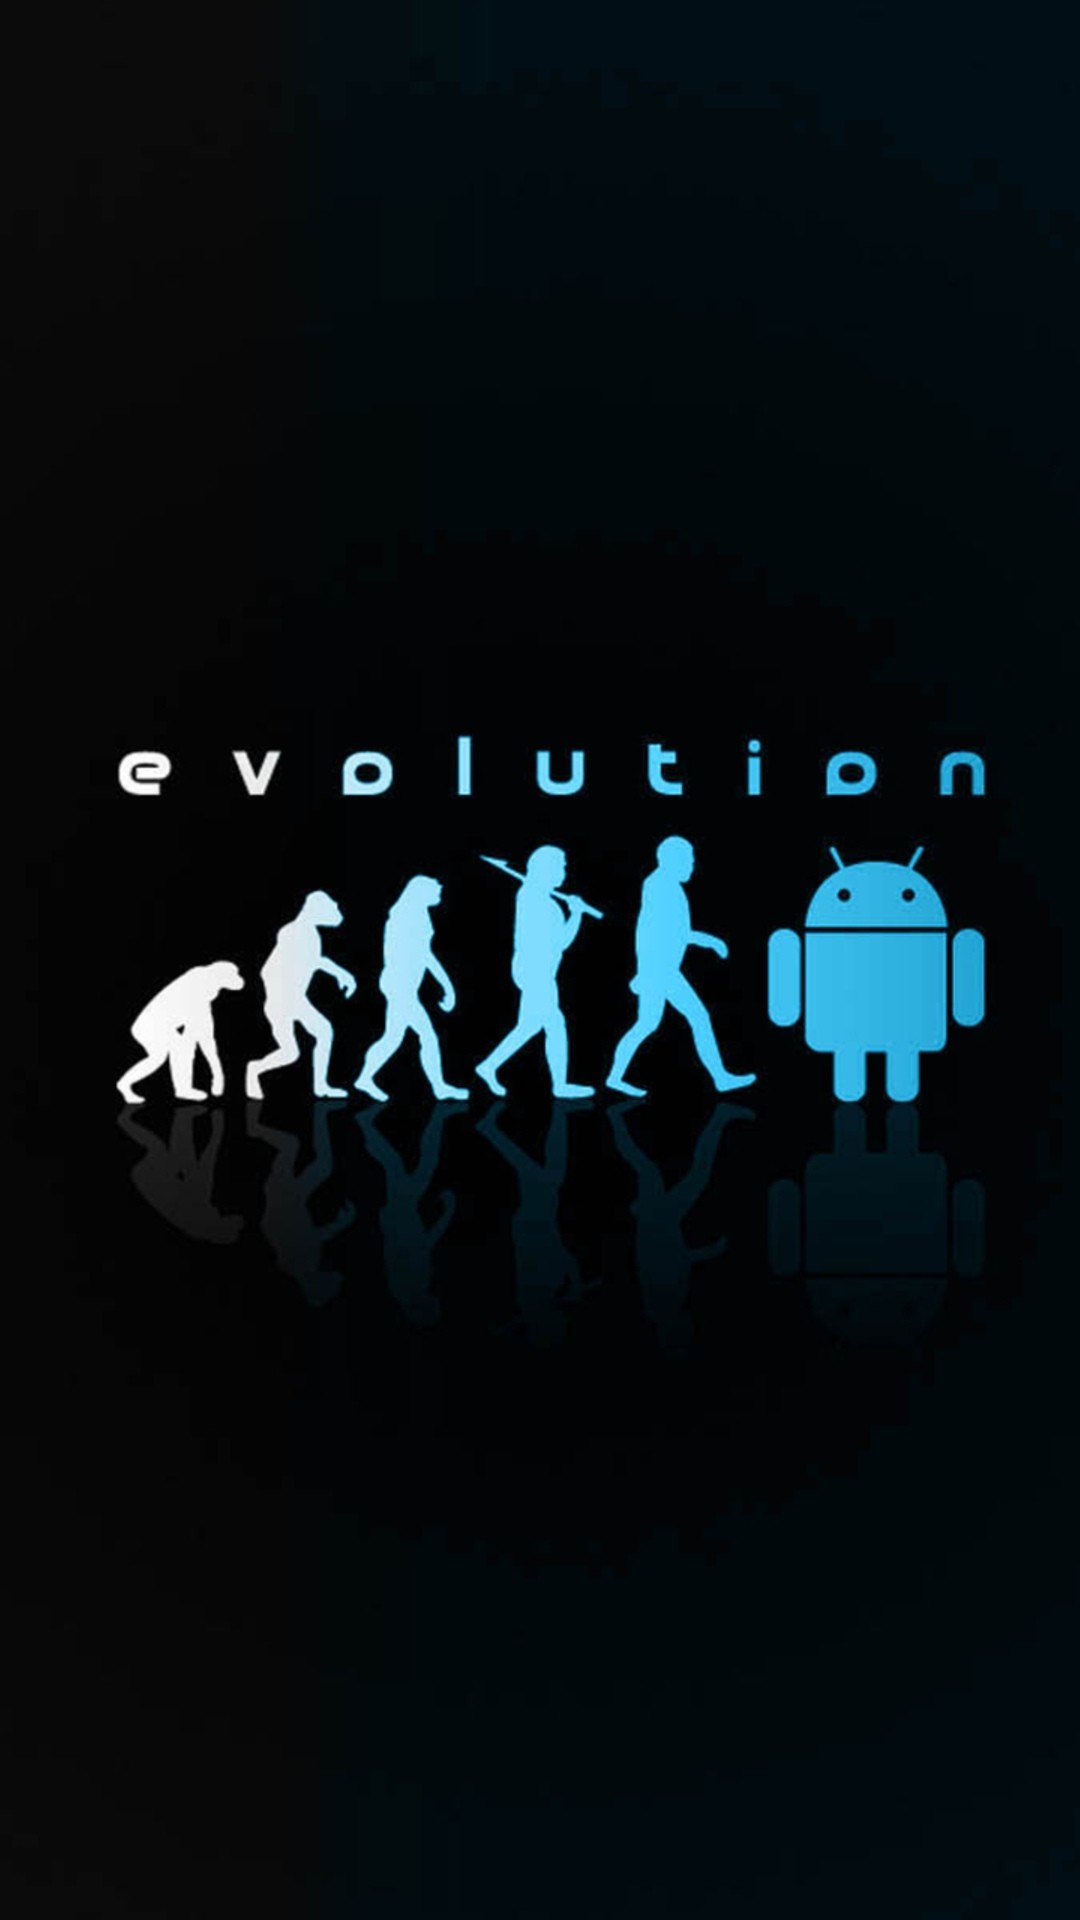 Android Evolution #android #wallpaper